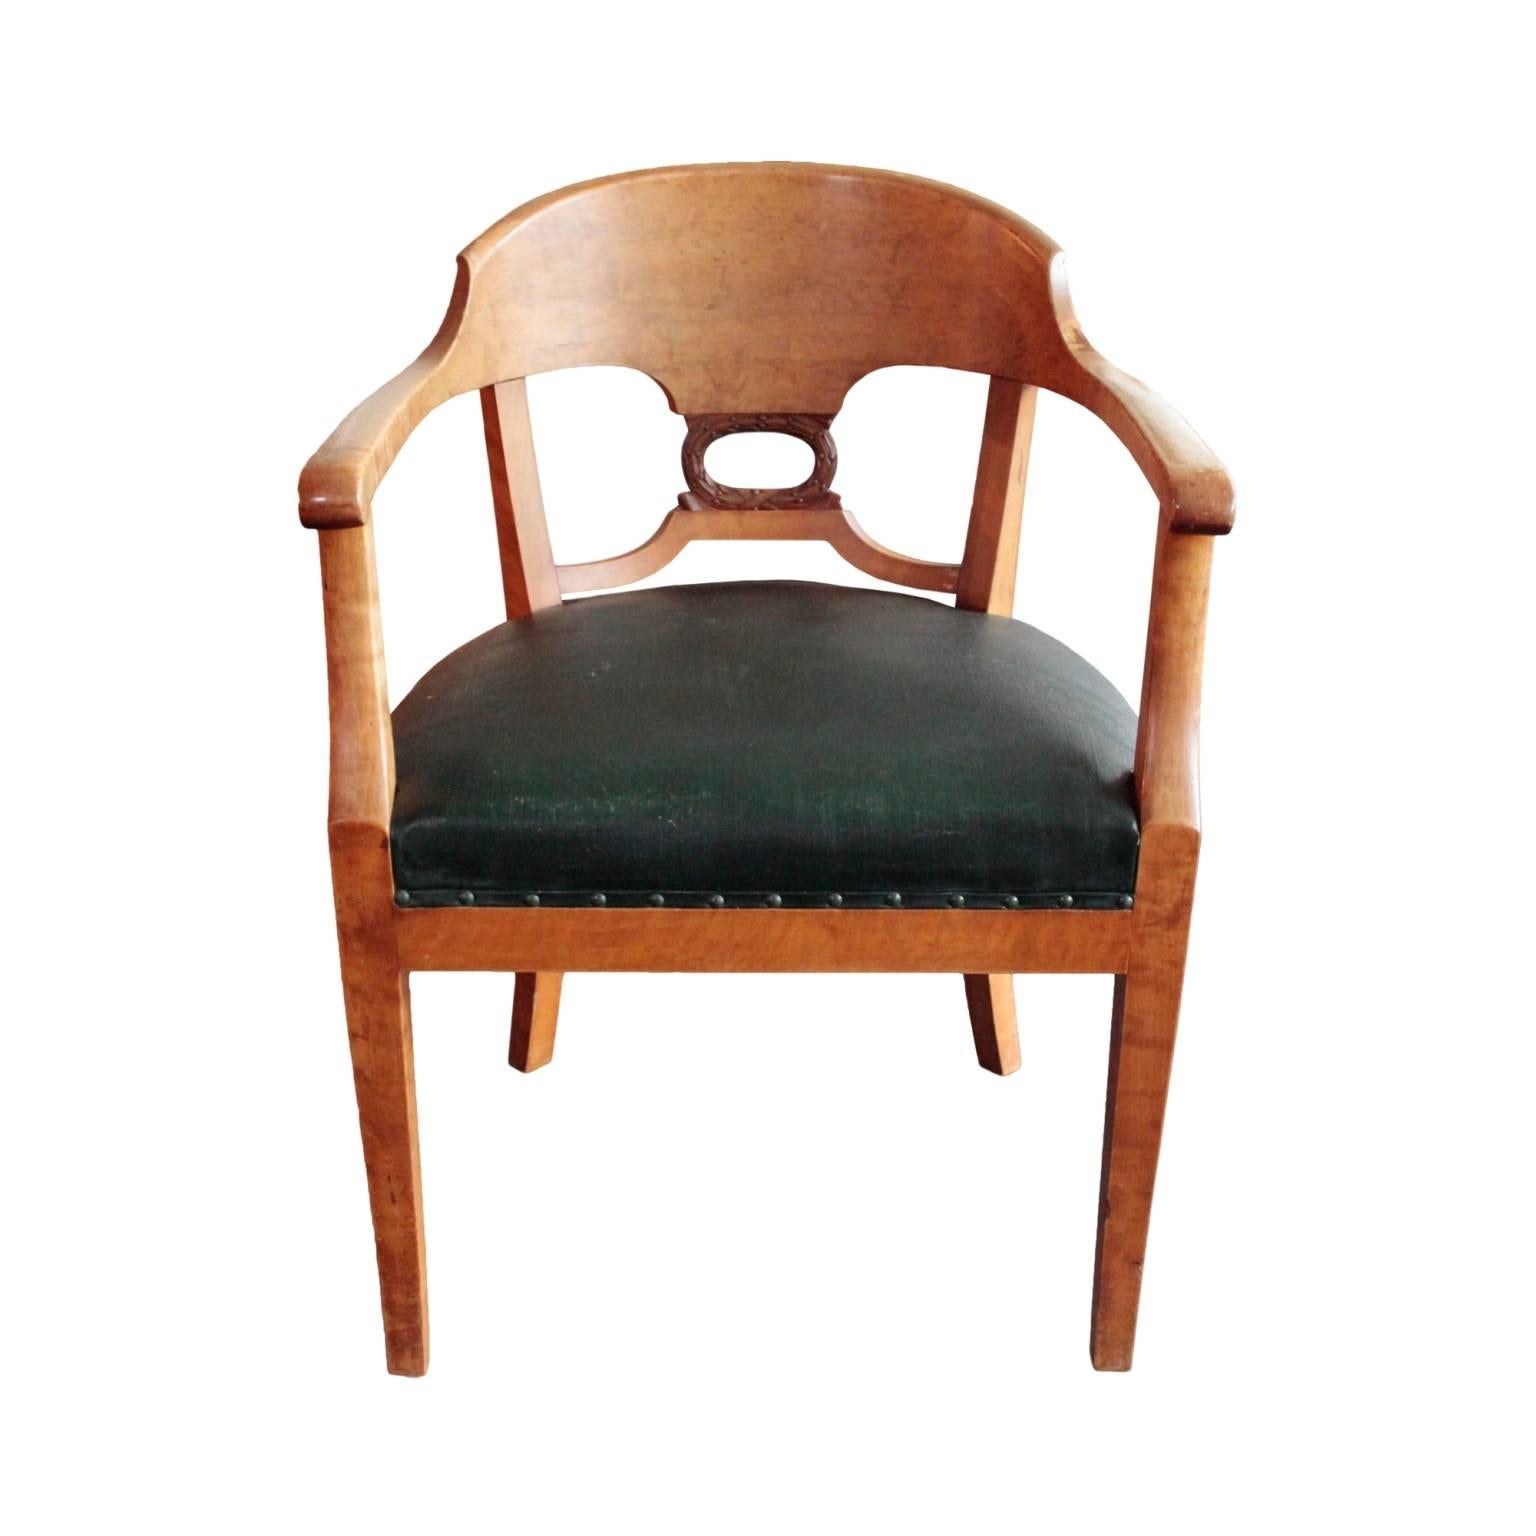 Elegant desk armchair featuring fan shaped barrel backrest decorated with laurel leaf carving in beech; arm rests ending in subtle scrolls; saber legs. Seat with preserved dark green leather with nailheads. In Karelian birch, flame birch and beech.